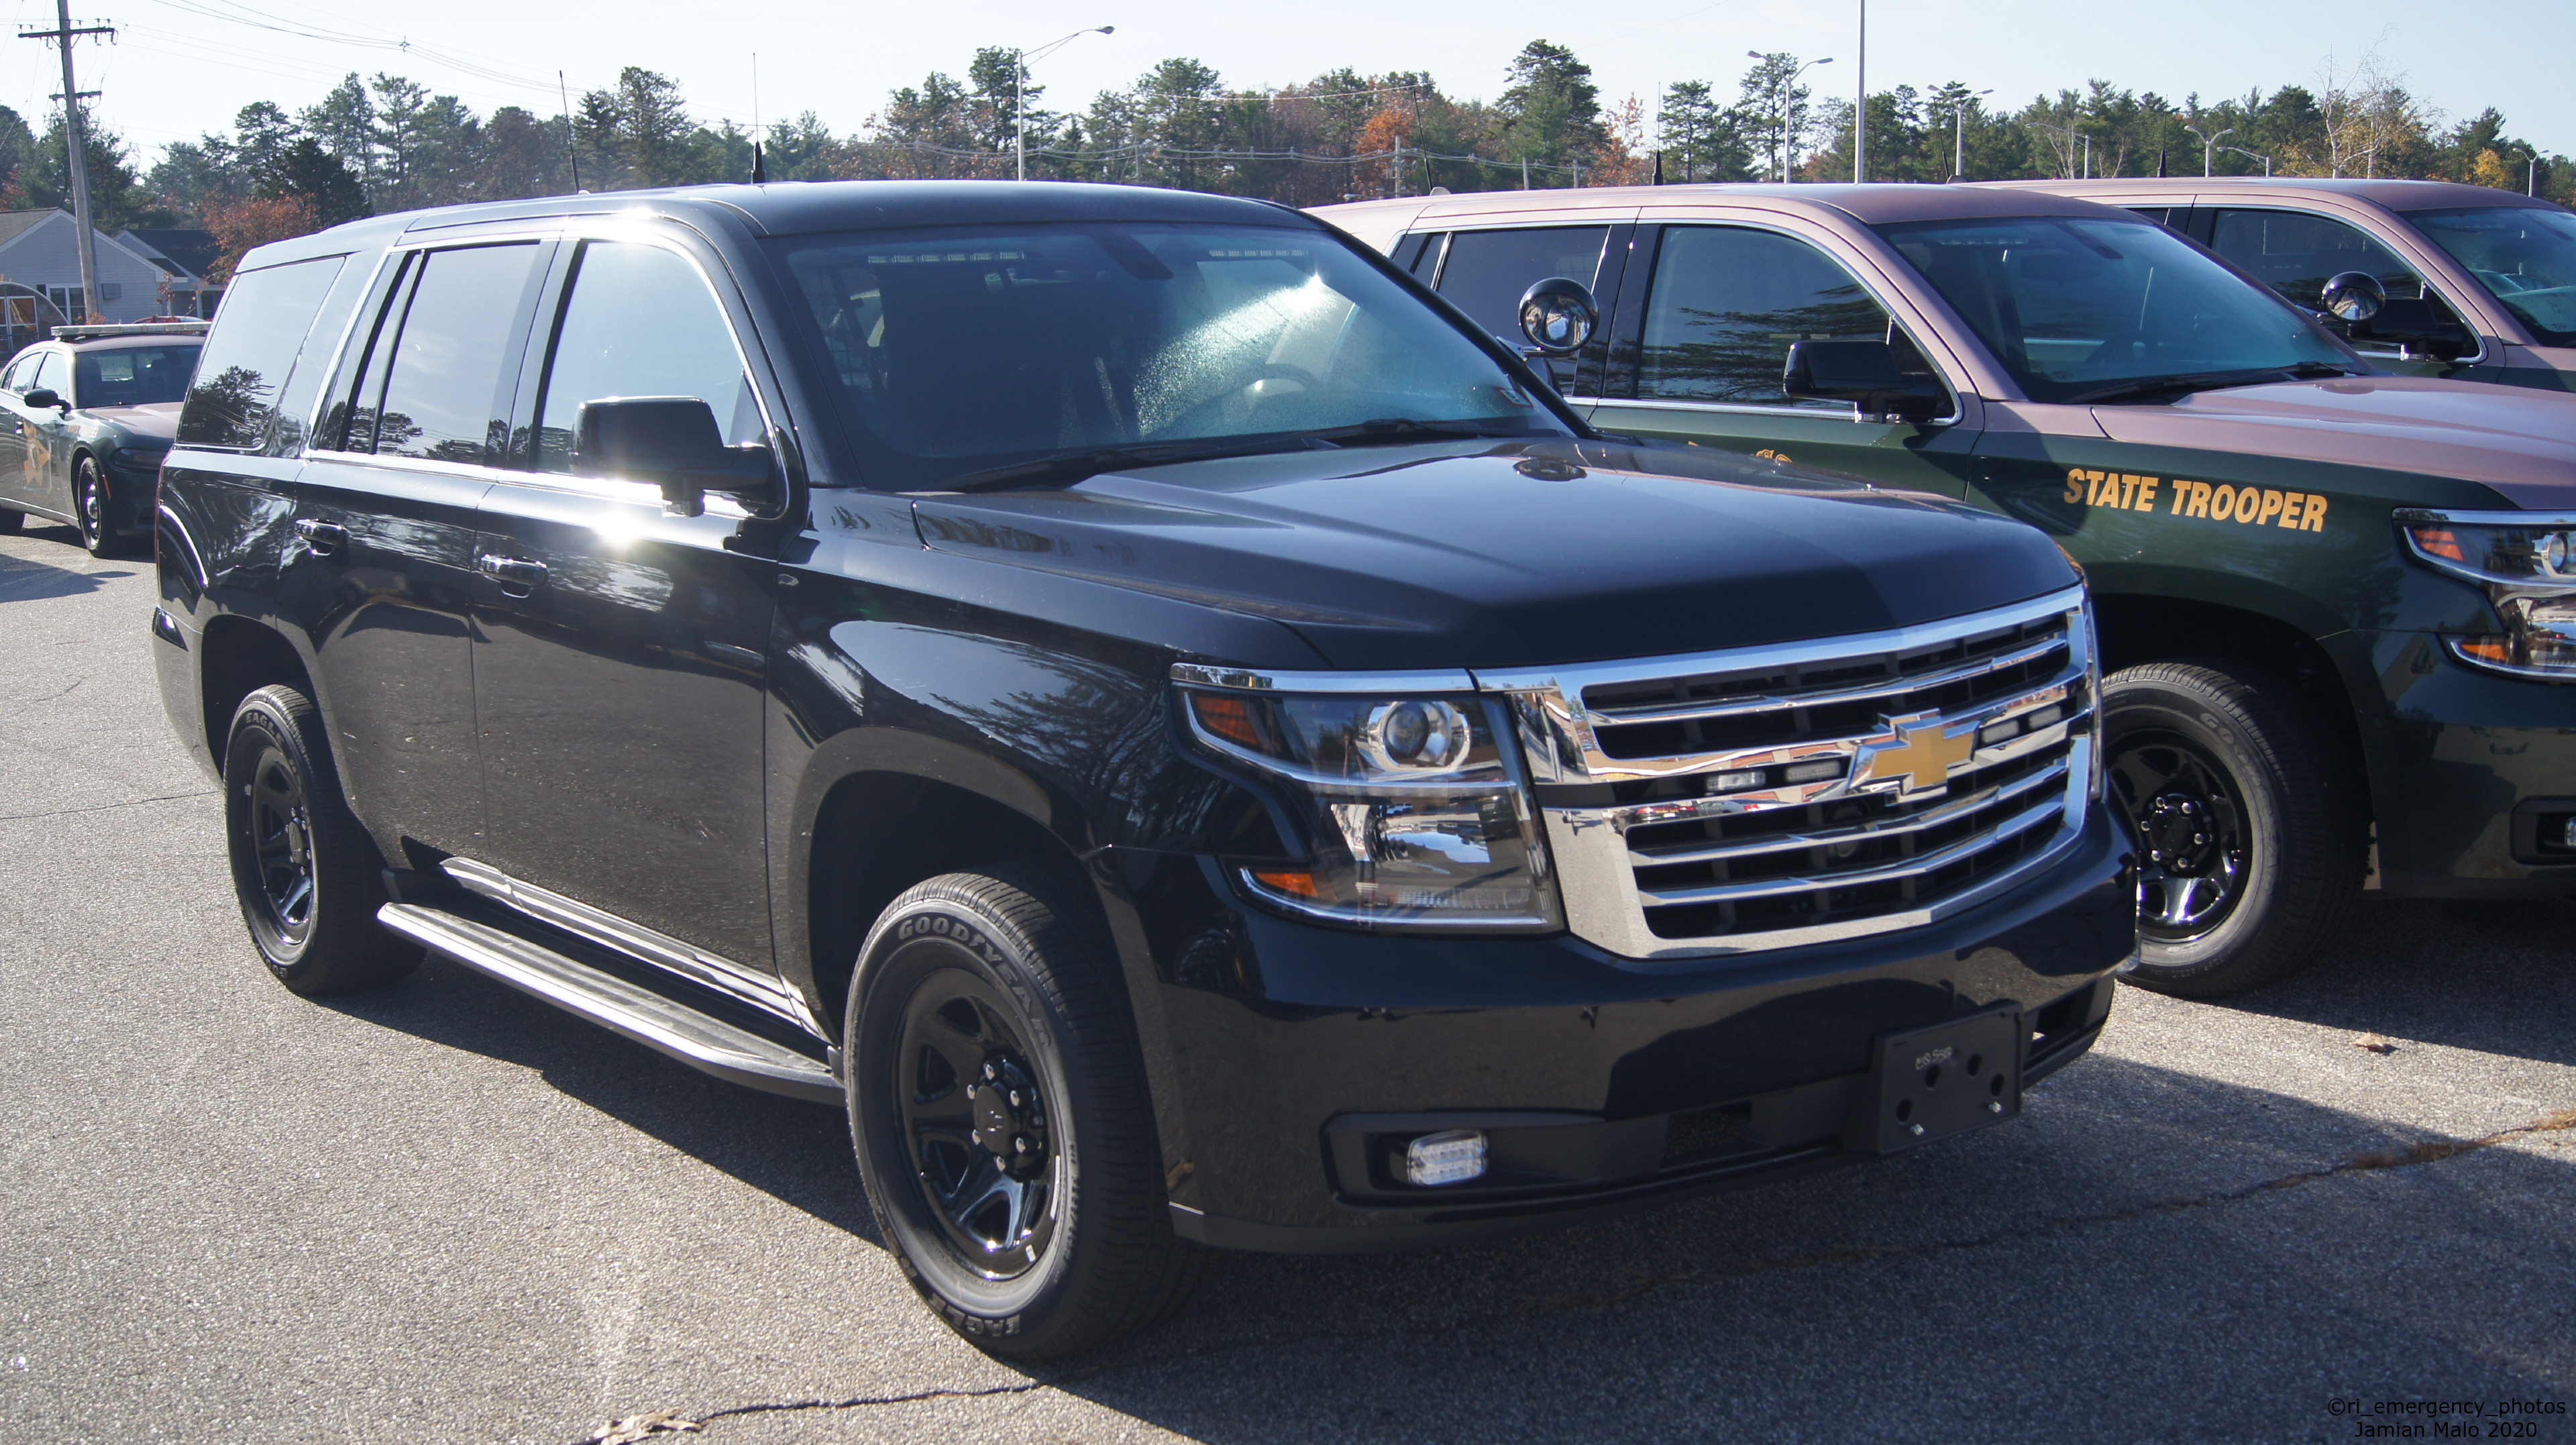 A photo  of New Hampshire State Police
            Cruiser 25, a 2020 Chevrolet Tahoe             taken by Jamian Malo